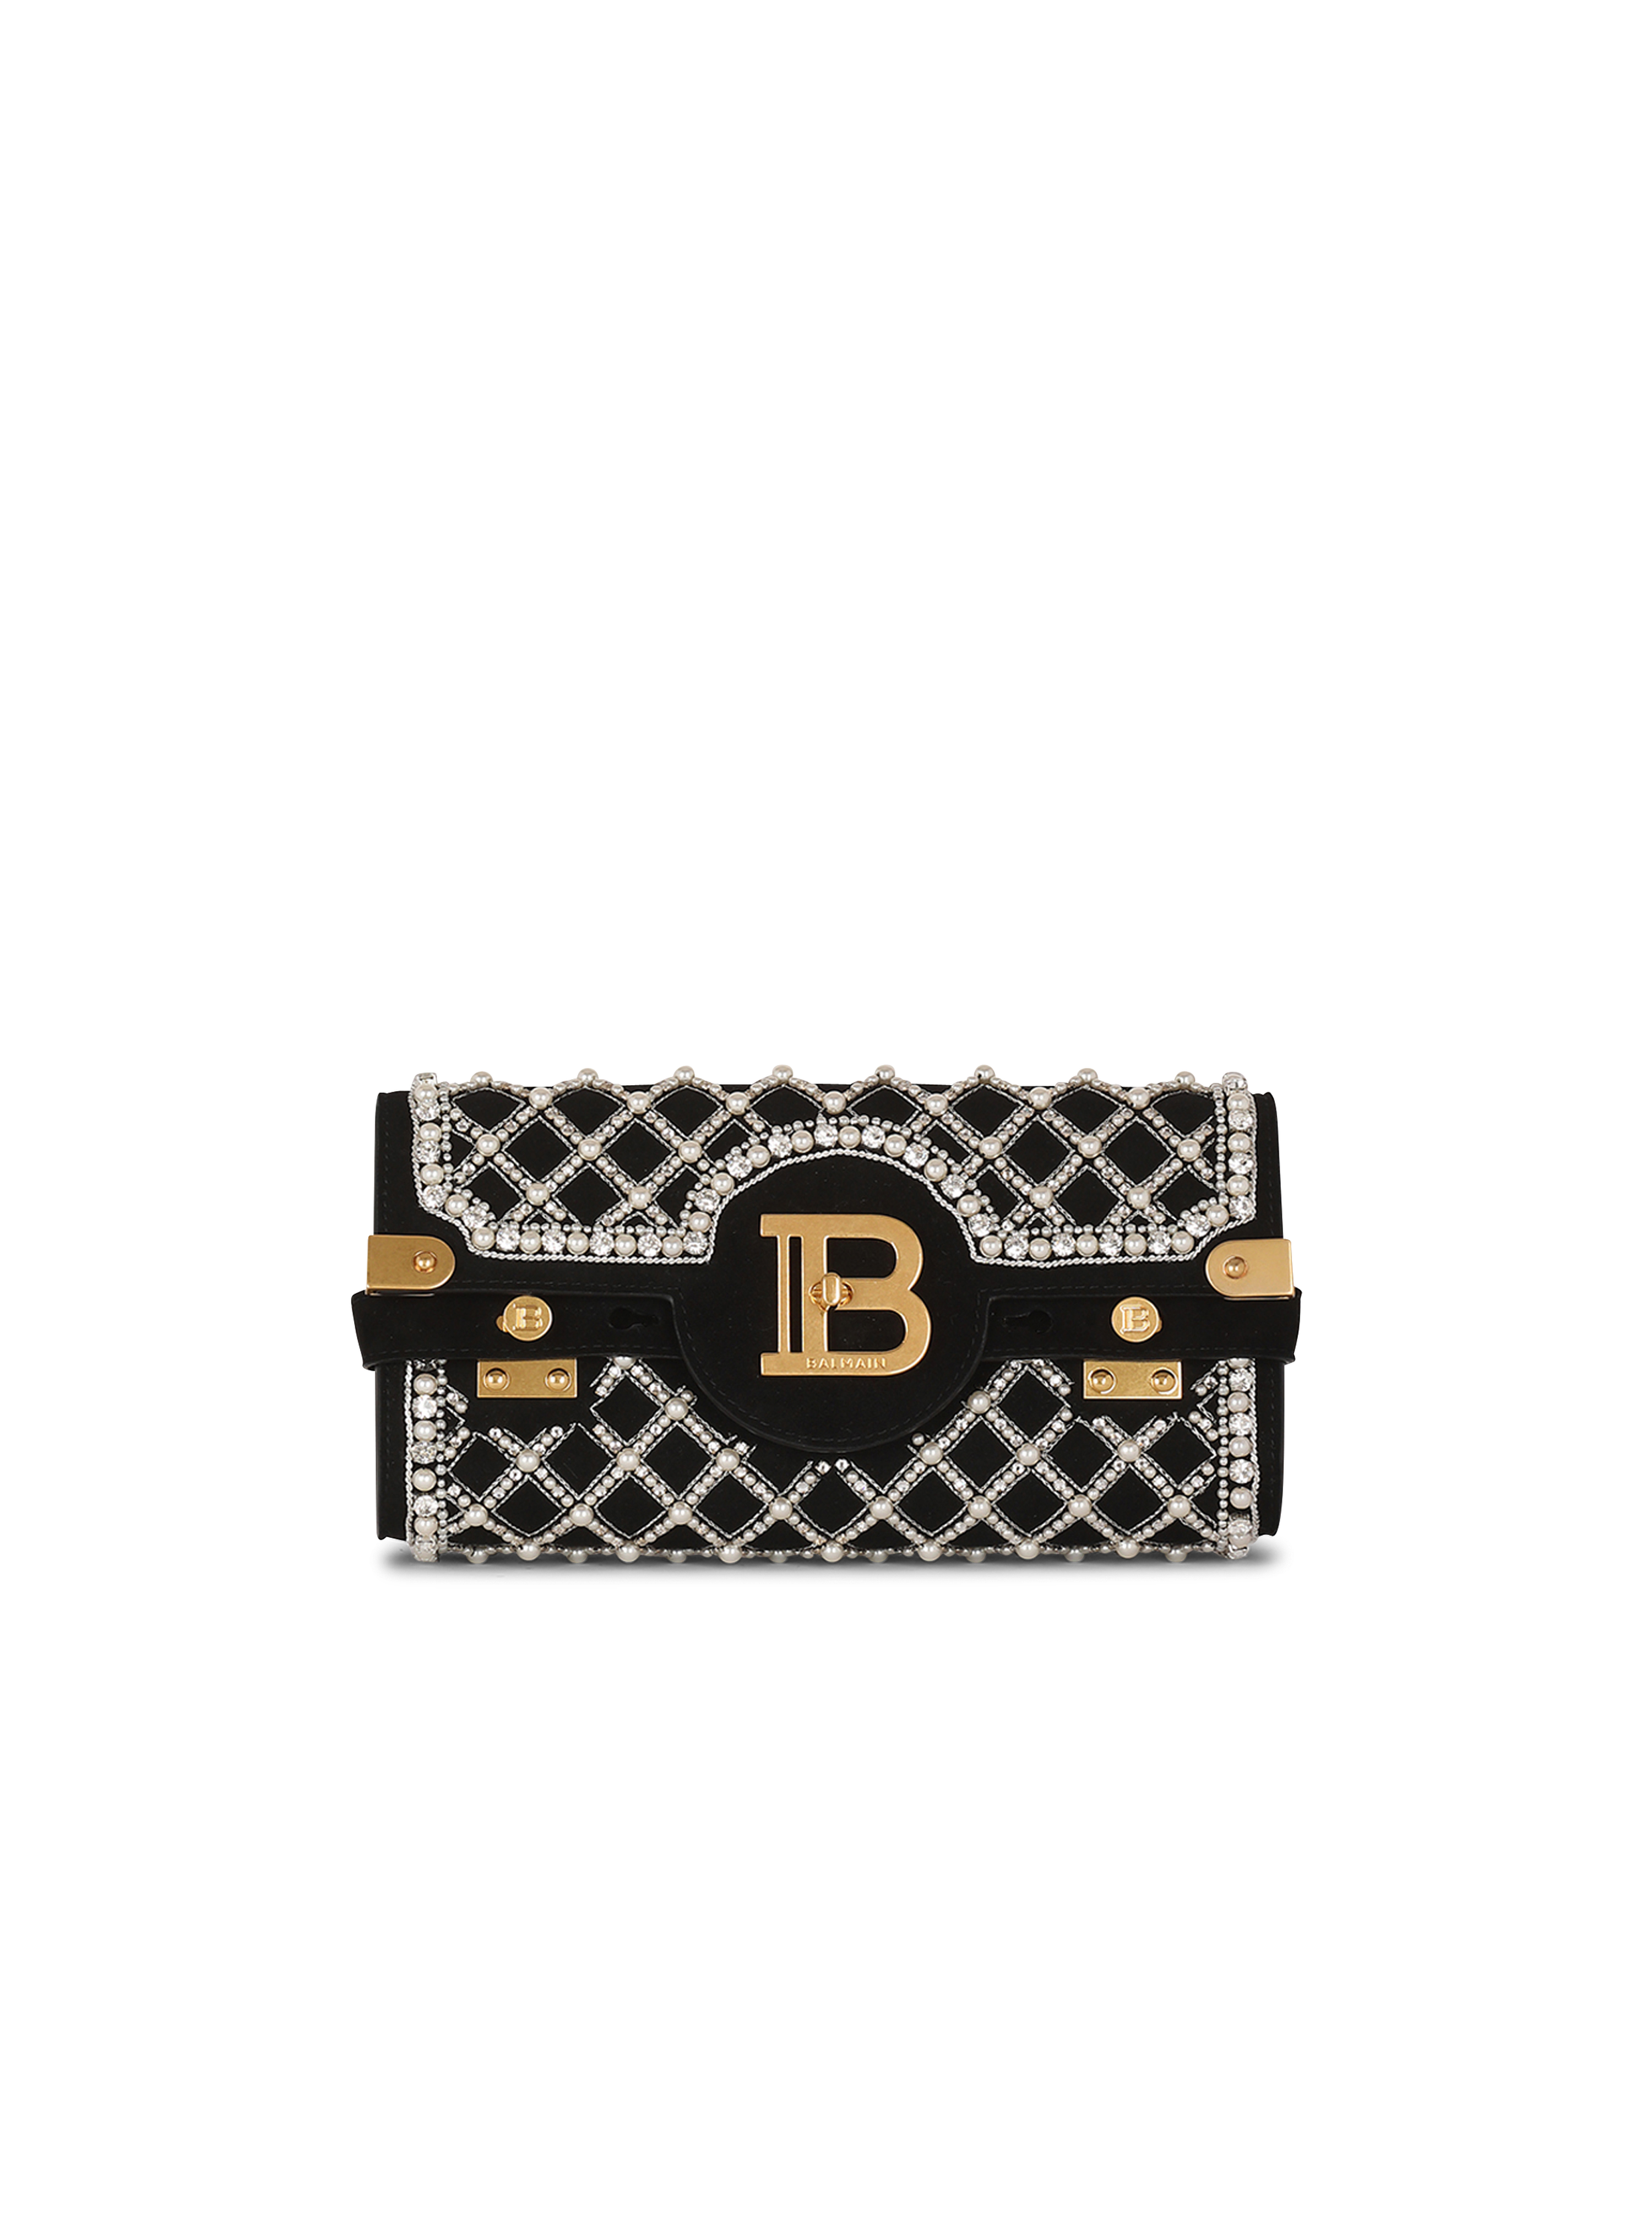 Suede and embroidered pearl B-Buzz 23 clutch bag, black